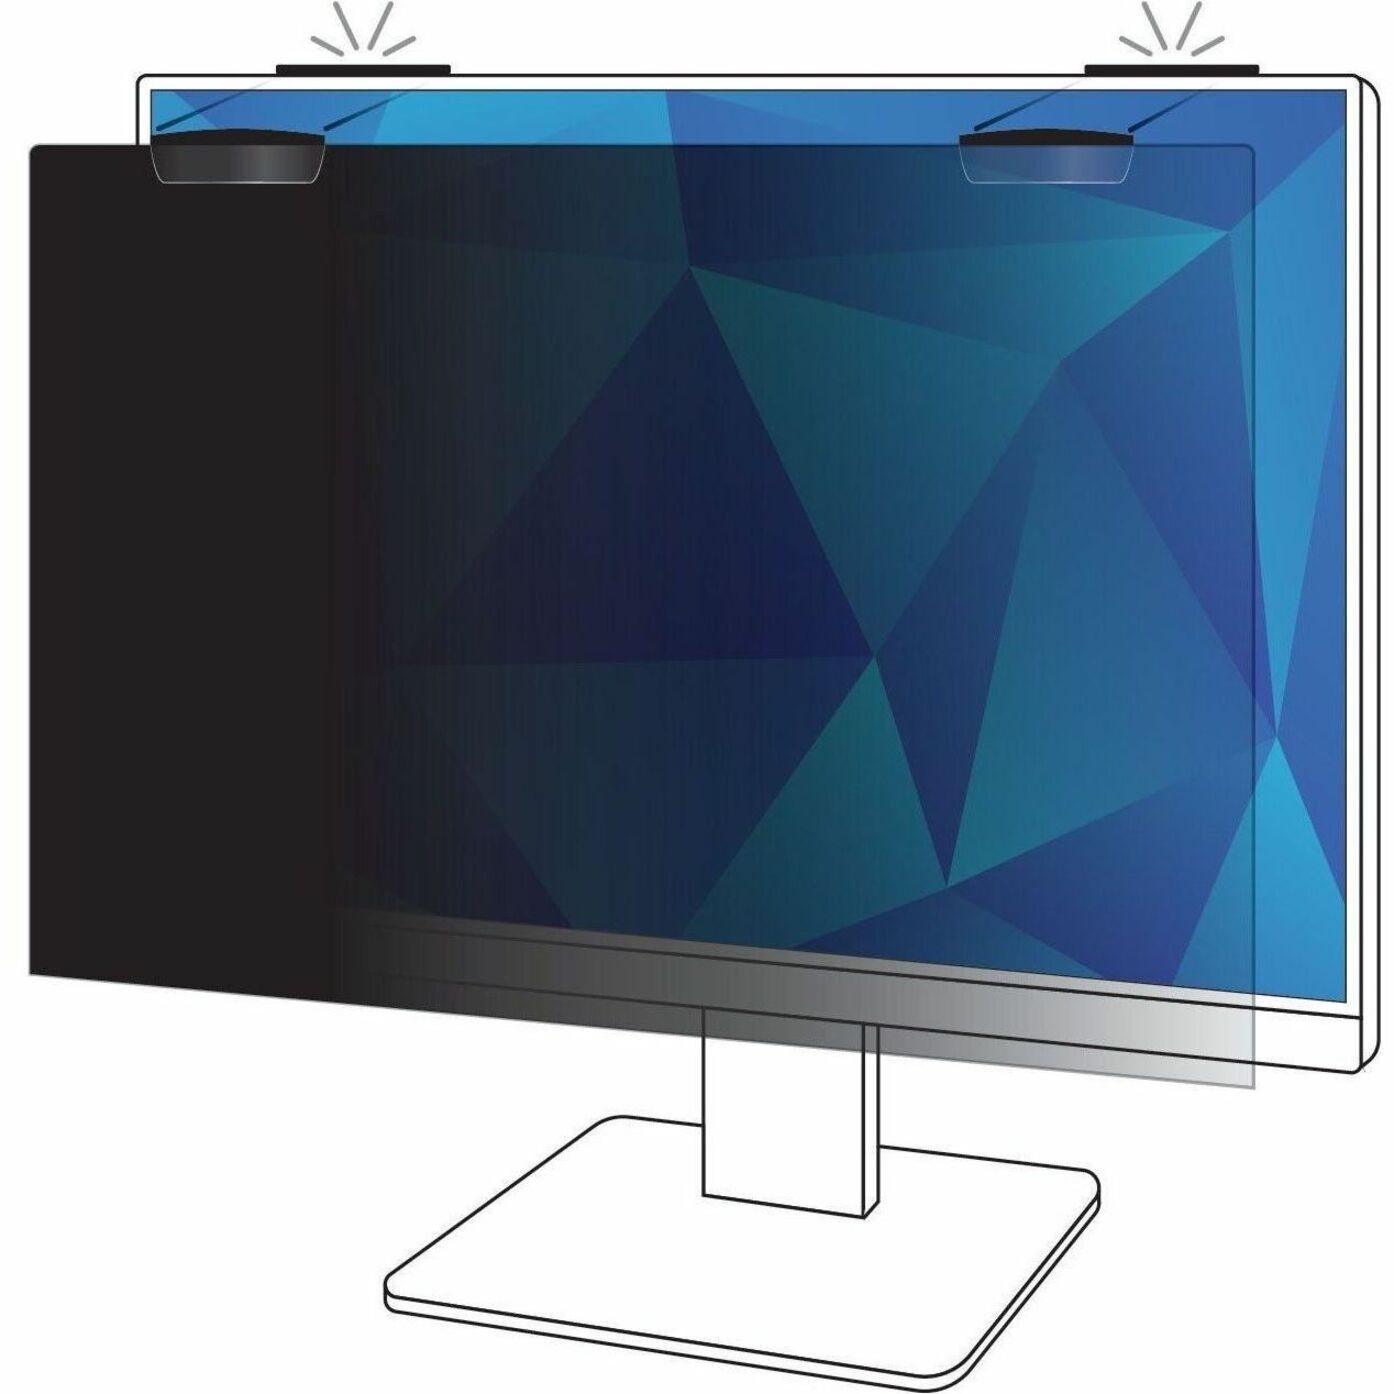 3M PF240W1EM Privacy Screen Filter, 24" Widescreen, Blue Light Reduction, Magnetic Attach